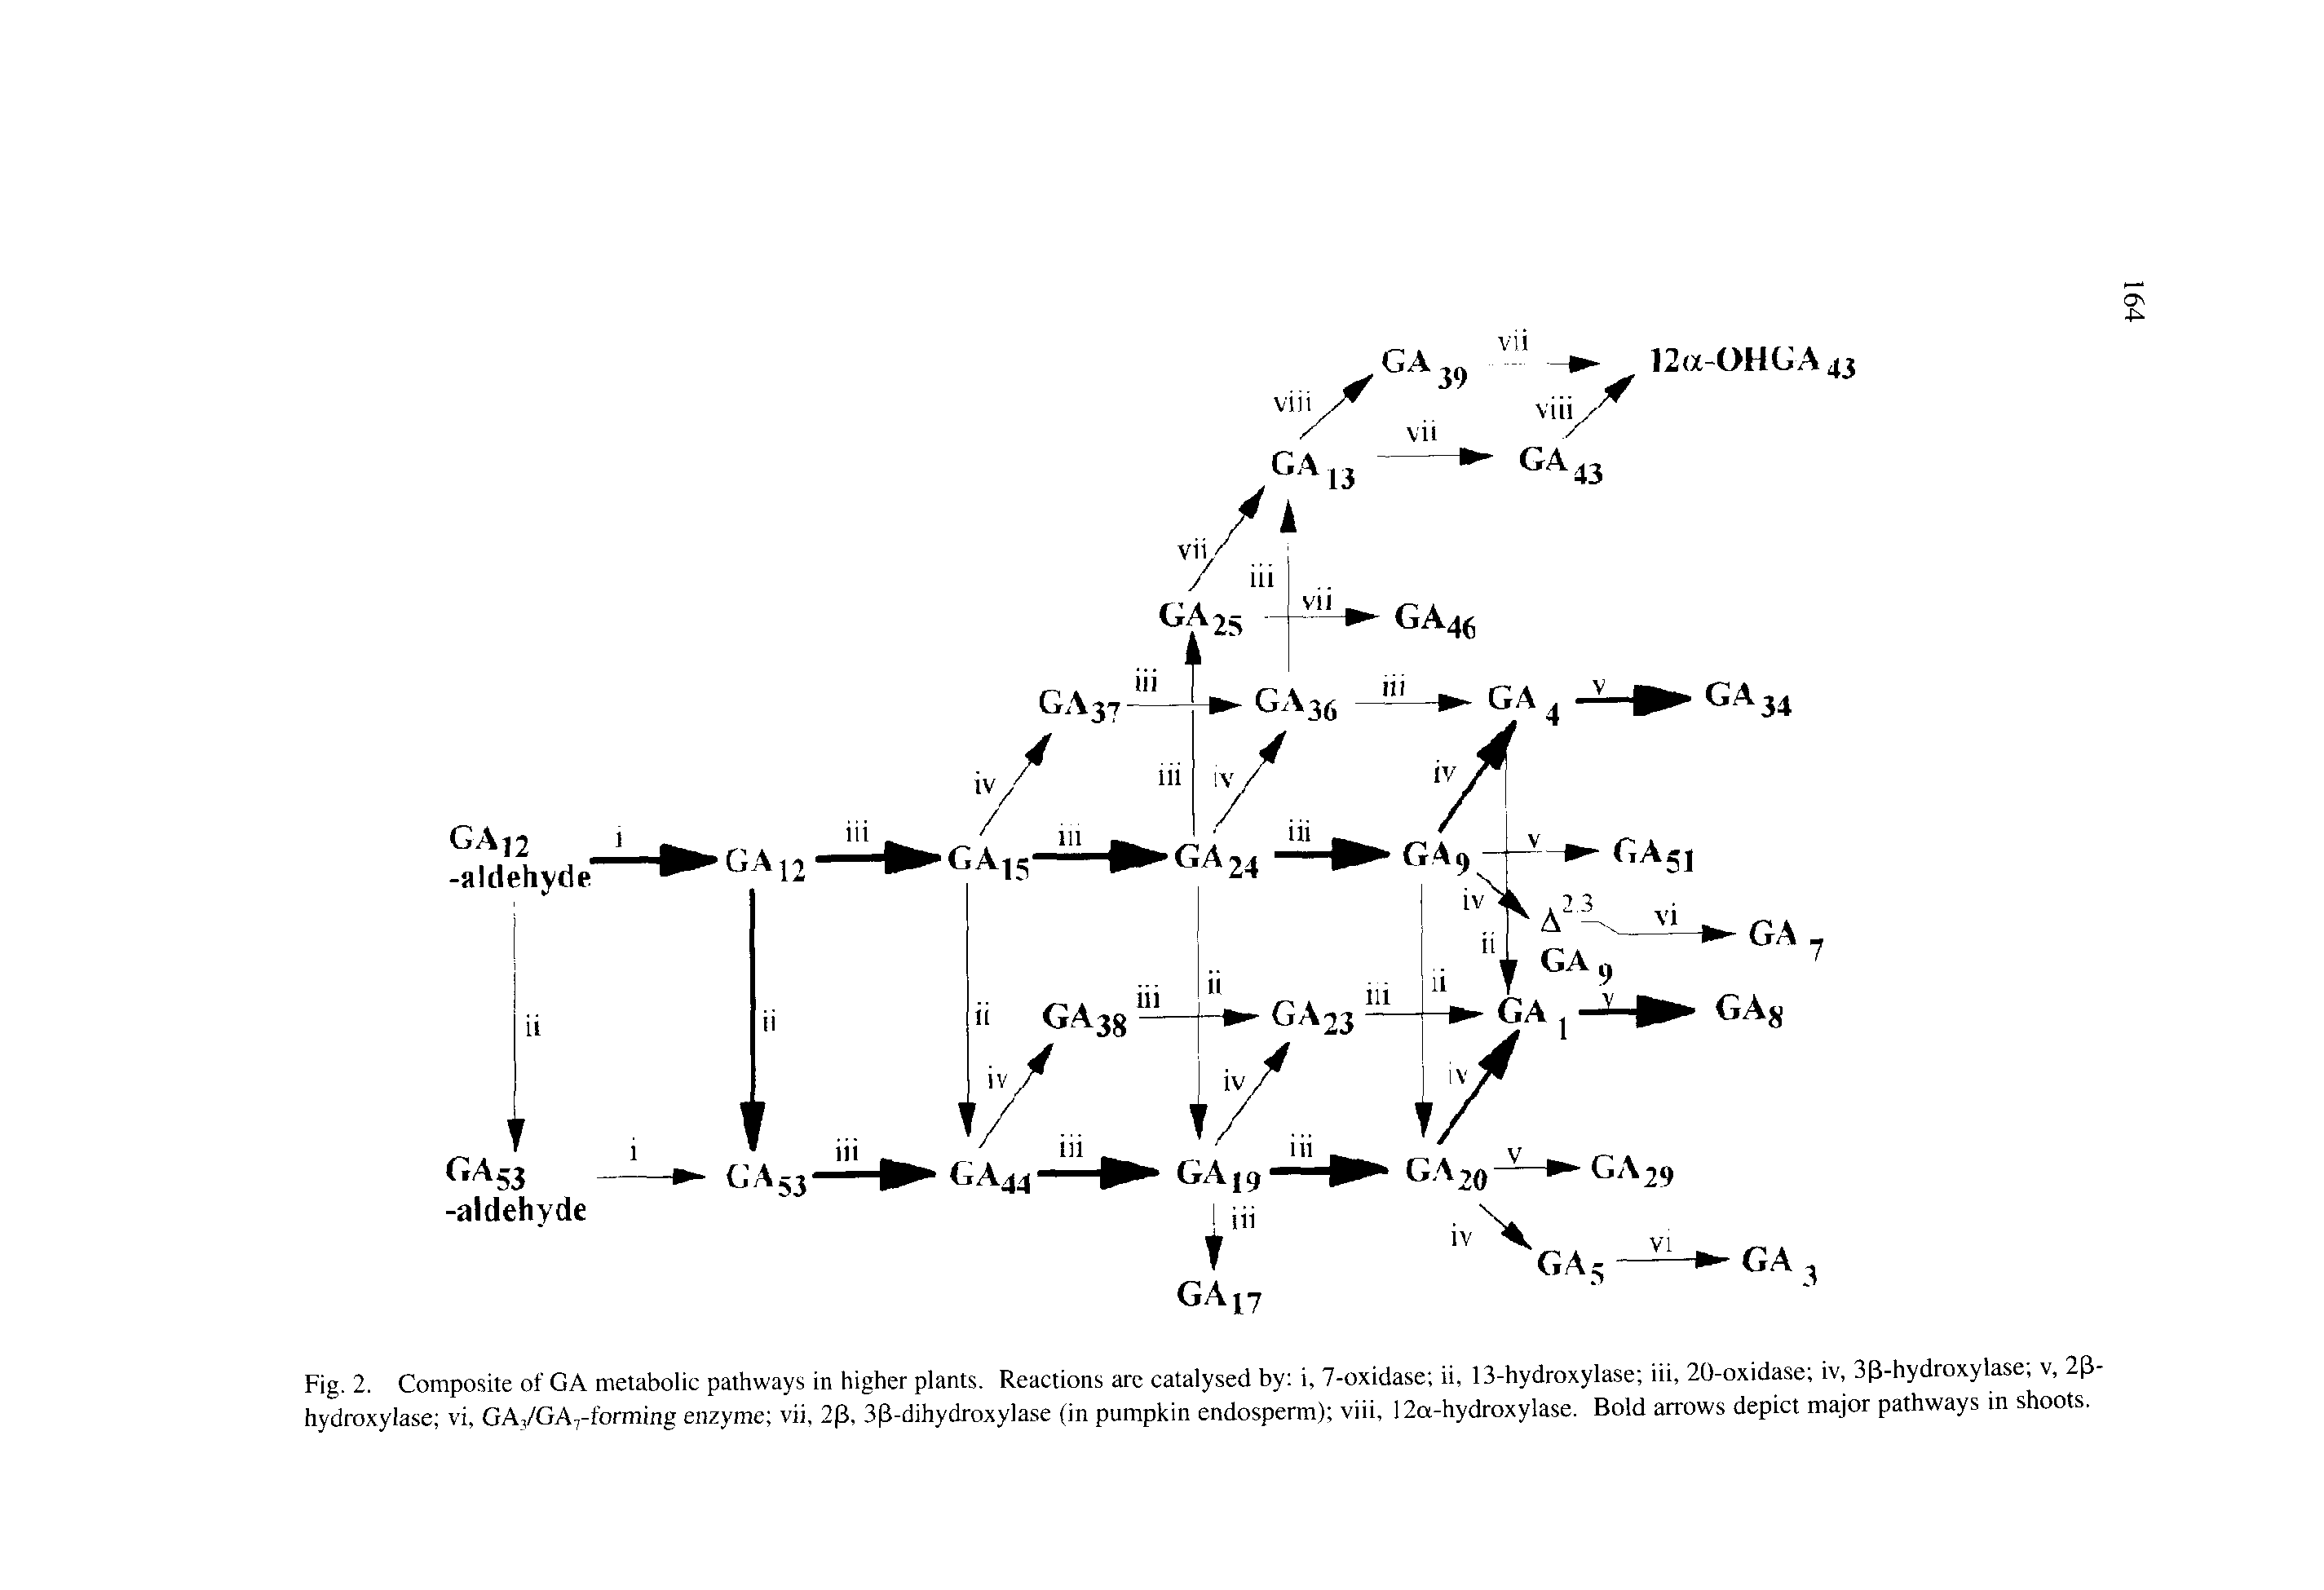 Fig. 2. Composite of GA metabolic pathways in higher plants. Reactions arc catalysed by i, 7-oxidase ii, 13-hydroxylase iii, 20-oxidase iv, 33-hydroxylase v, 23-hydroxylase vi, GA,/GA7-forming enzyme vii, 23, 33-dihydroxylase (in pumpkin endosperm) viii, 12a-hydroxylase. Bold arrows depict major pathways in shoots.